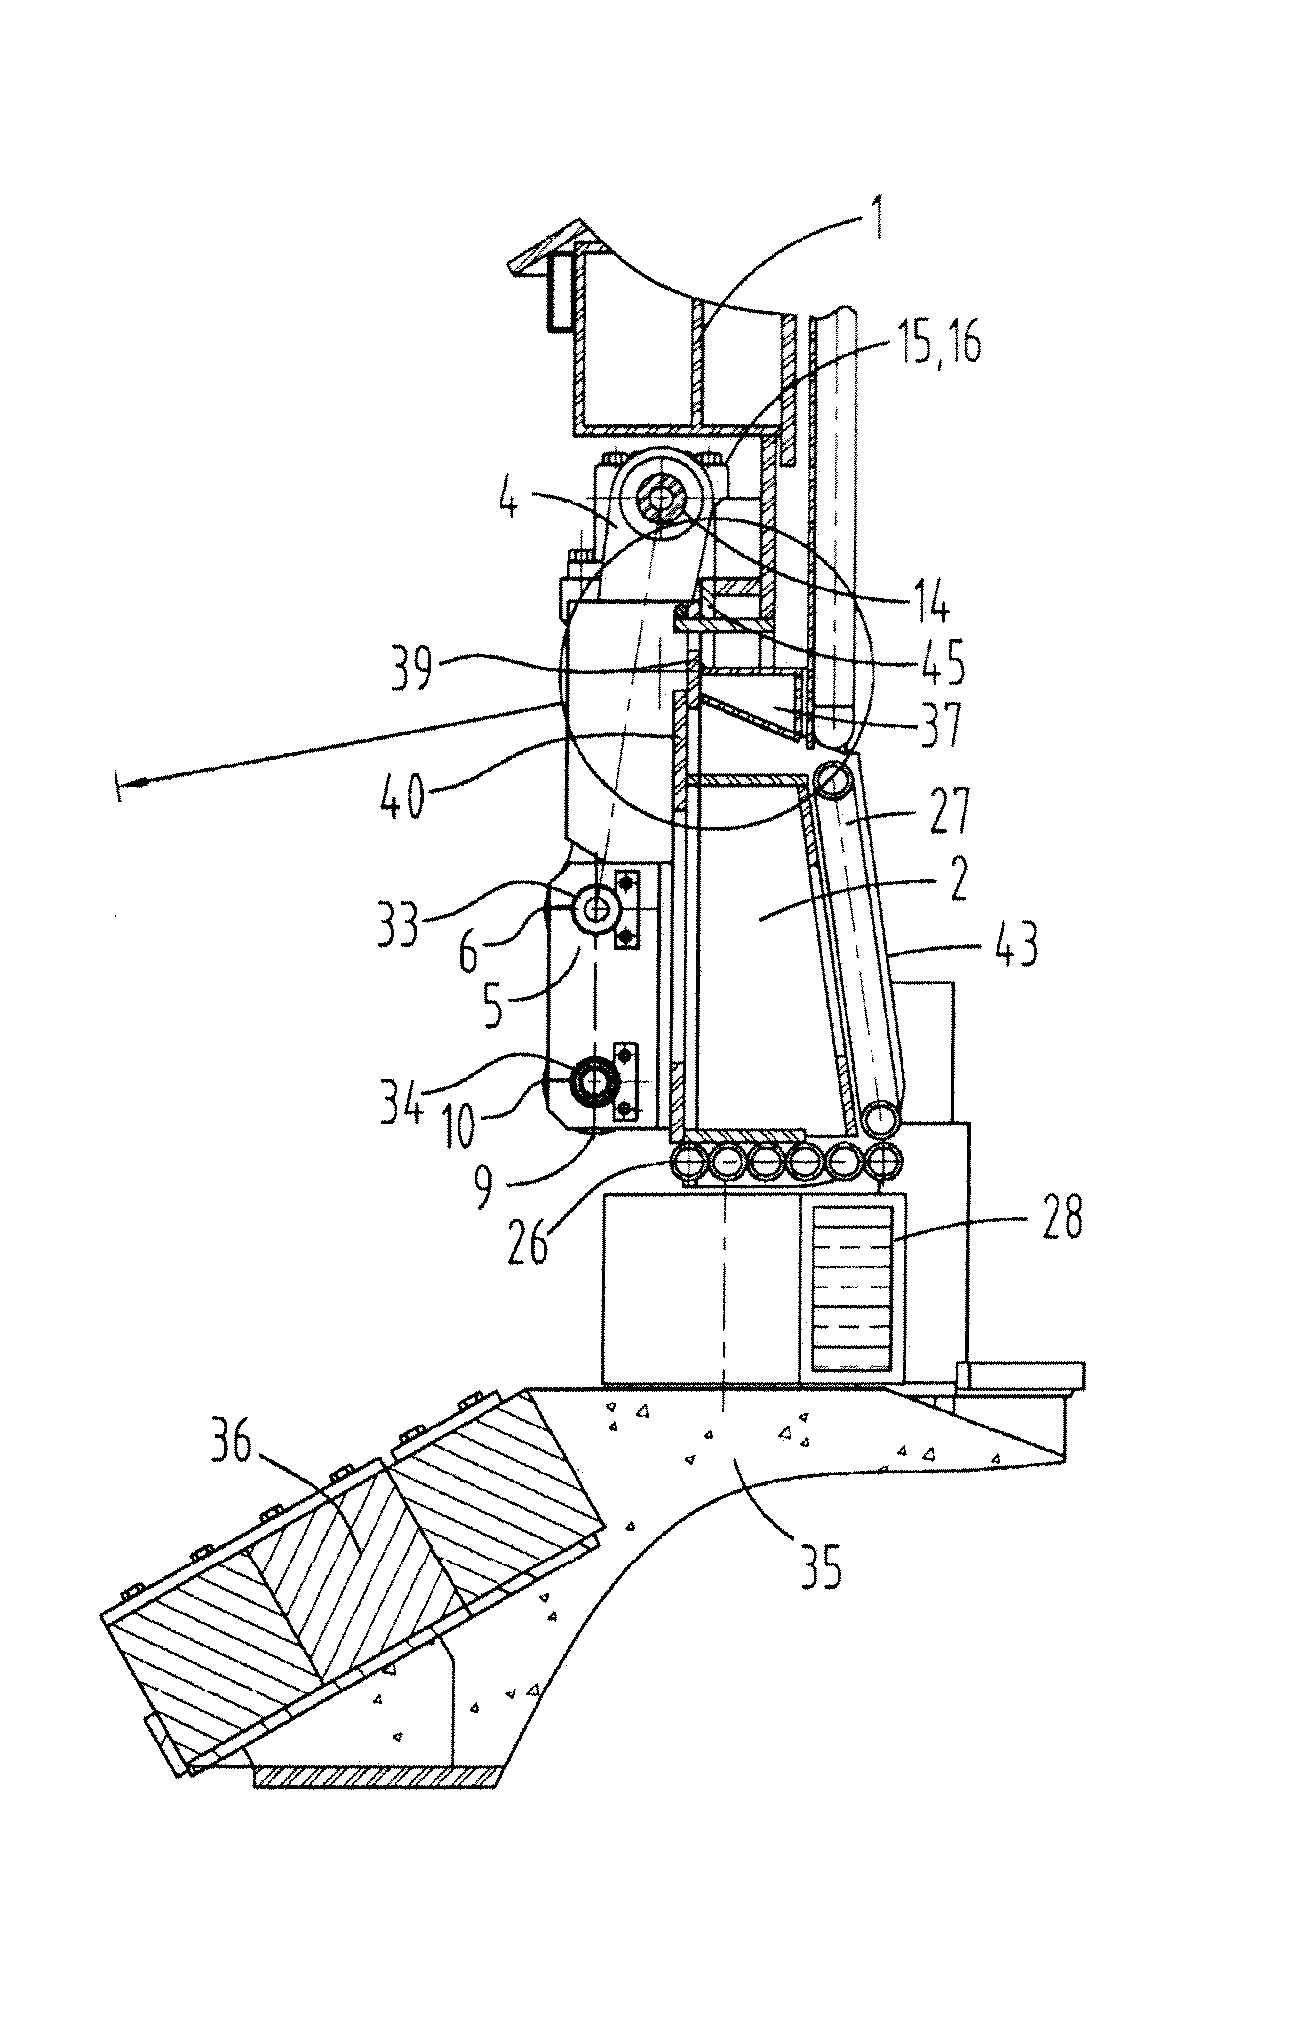 Sealing apparatus for a slag door of a metallurgical furnace